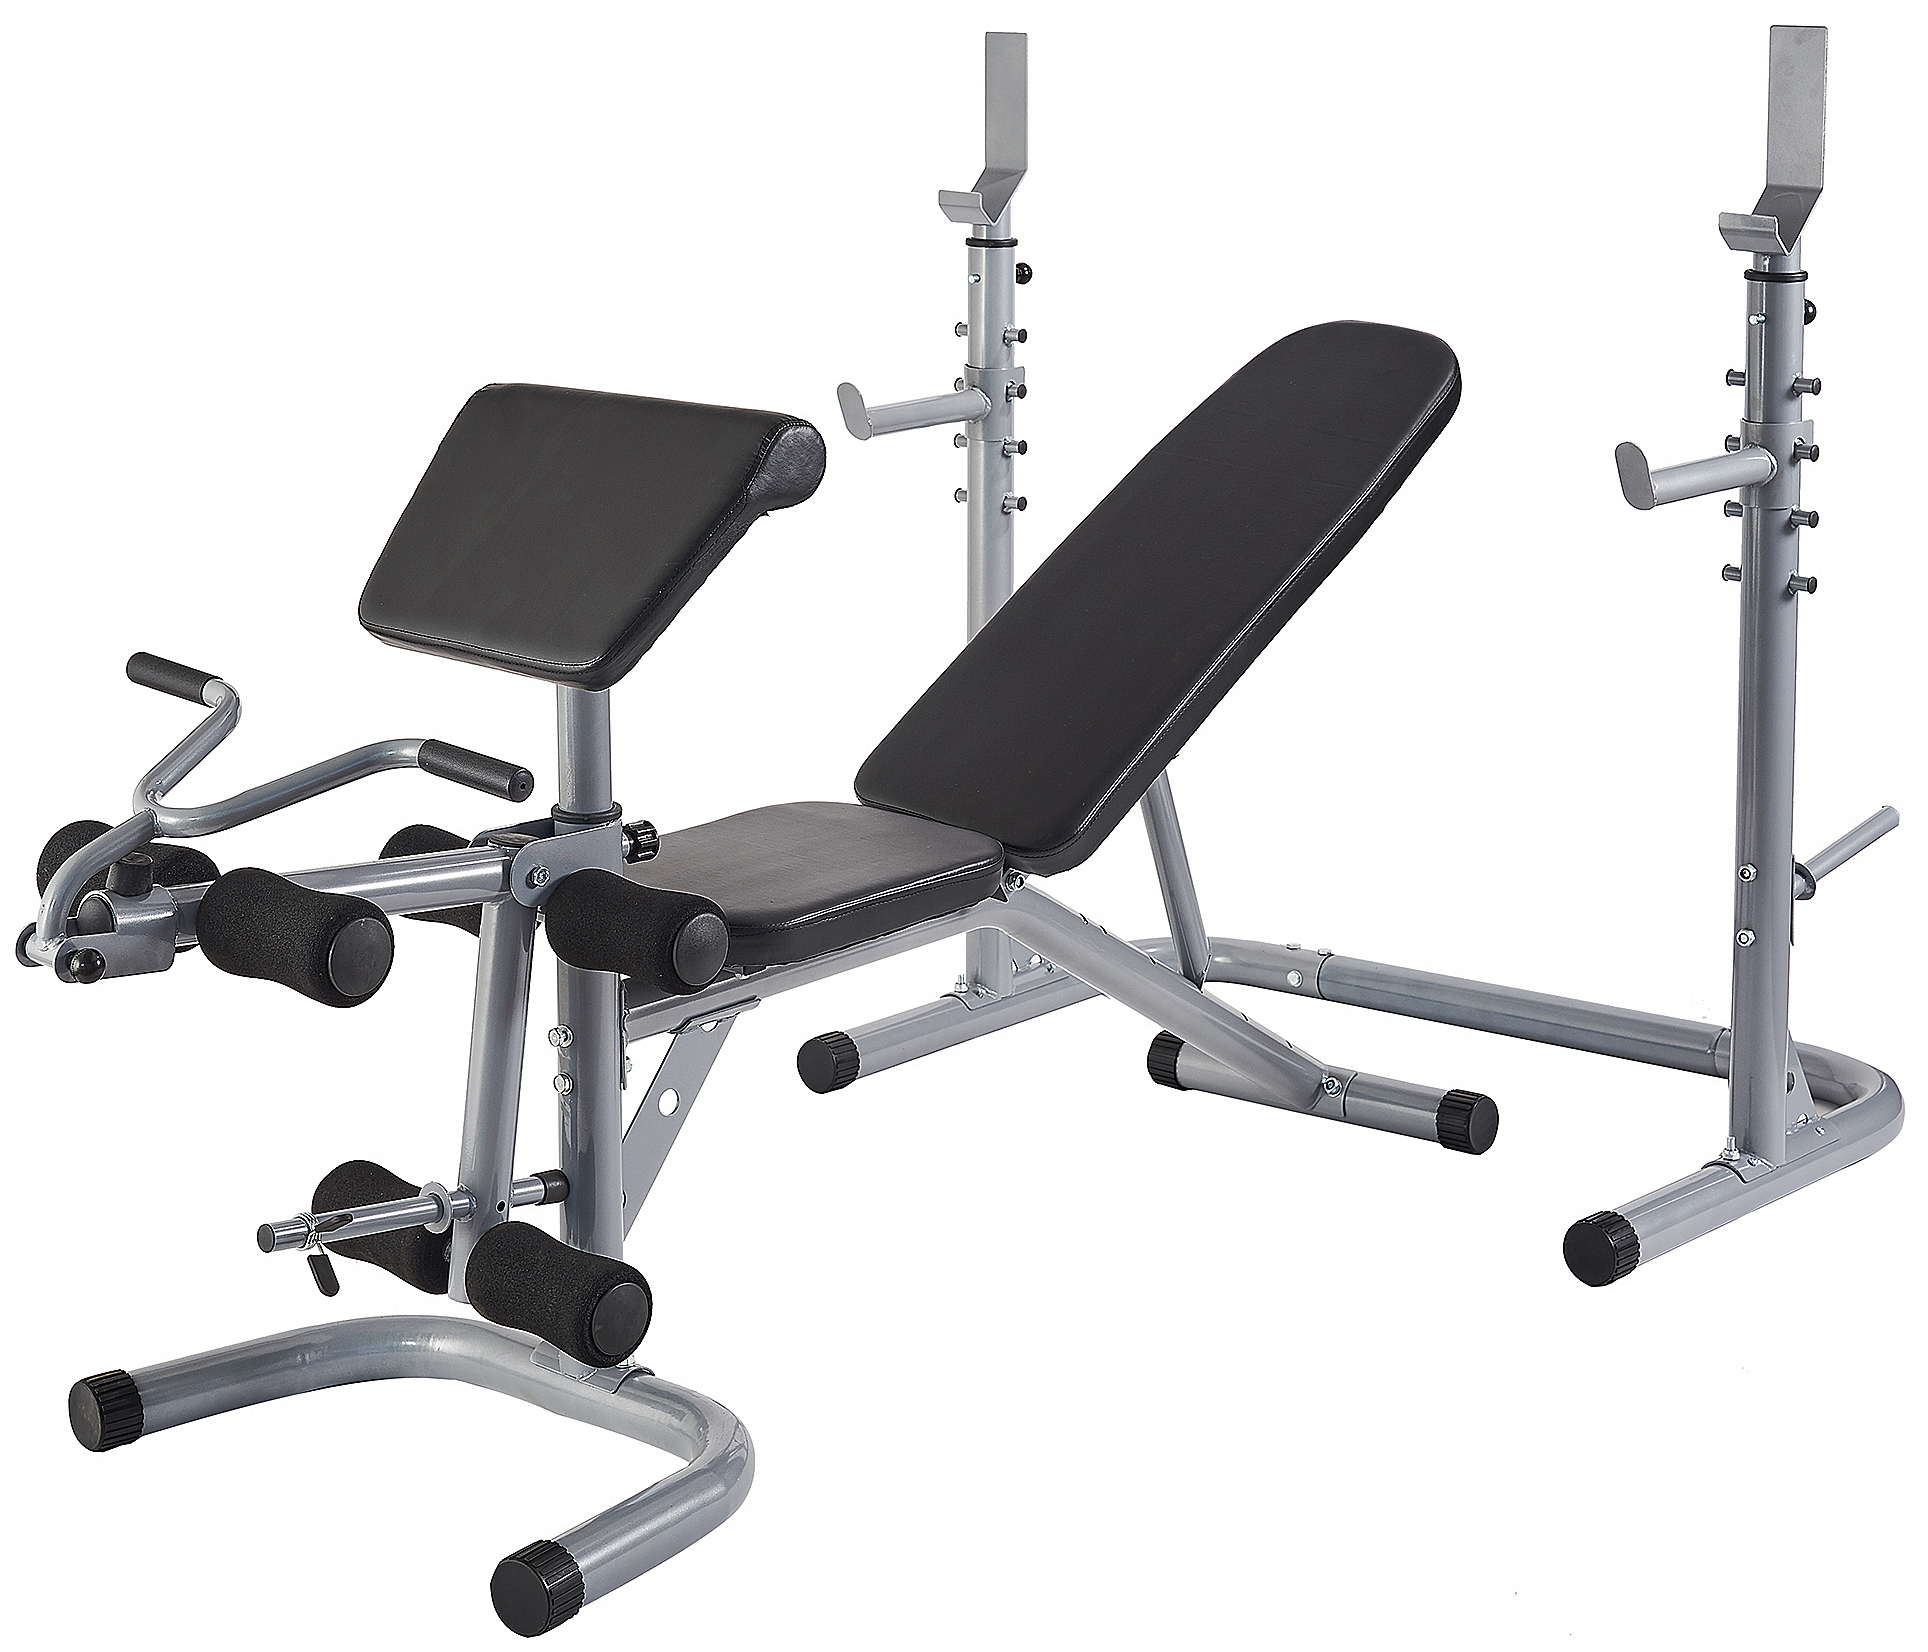 Everyday Essentials Multifunctional Workout Station Adjustable Olympic Workout Bench with Squat Rack, Leg Extension, Preacher Curl, and Weight Storage - image 5 of 6